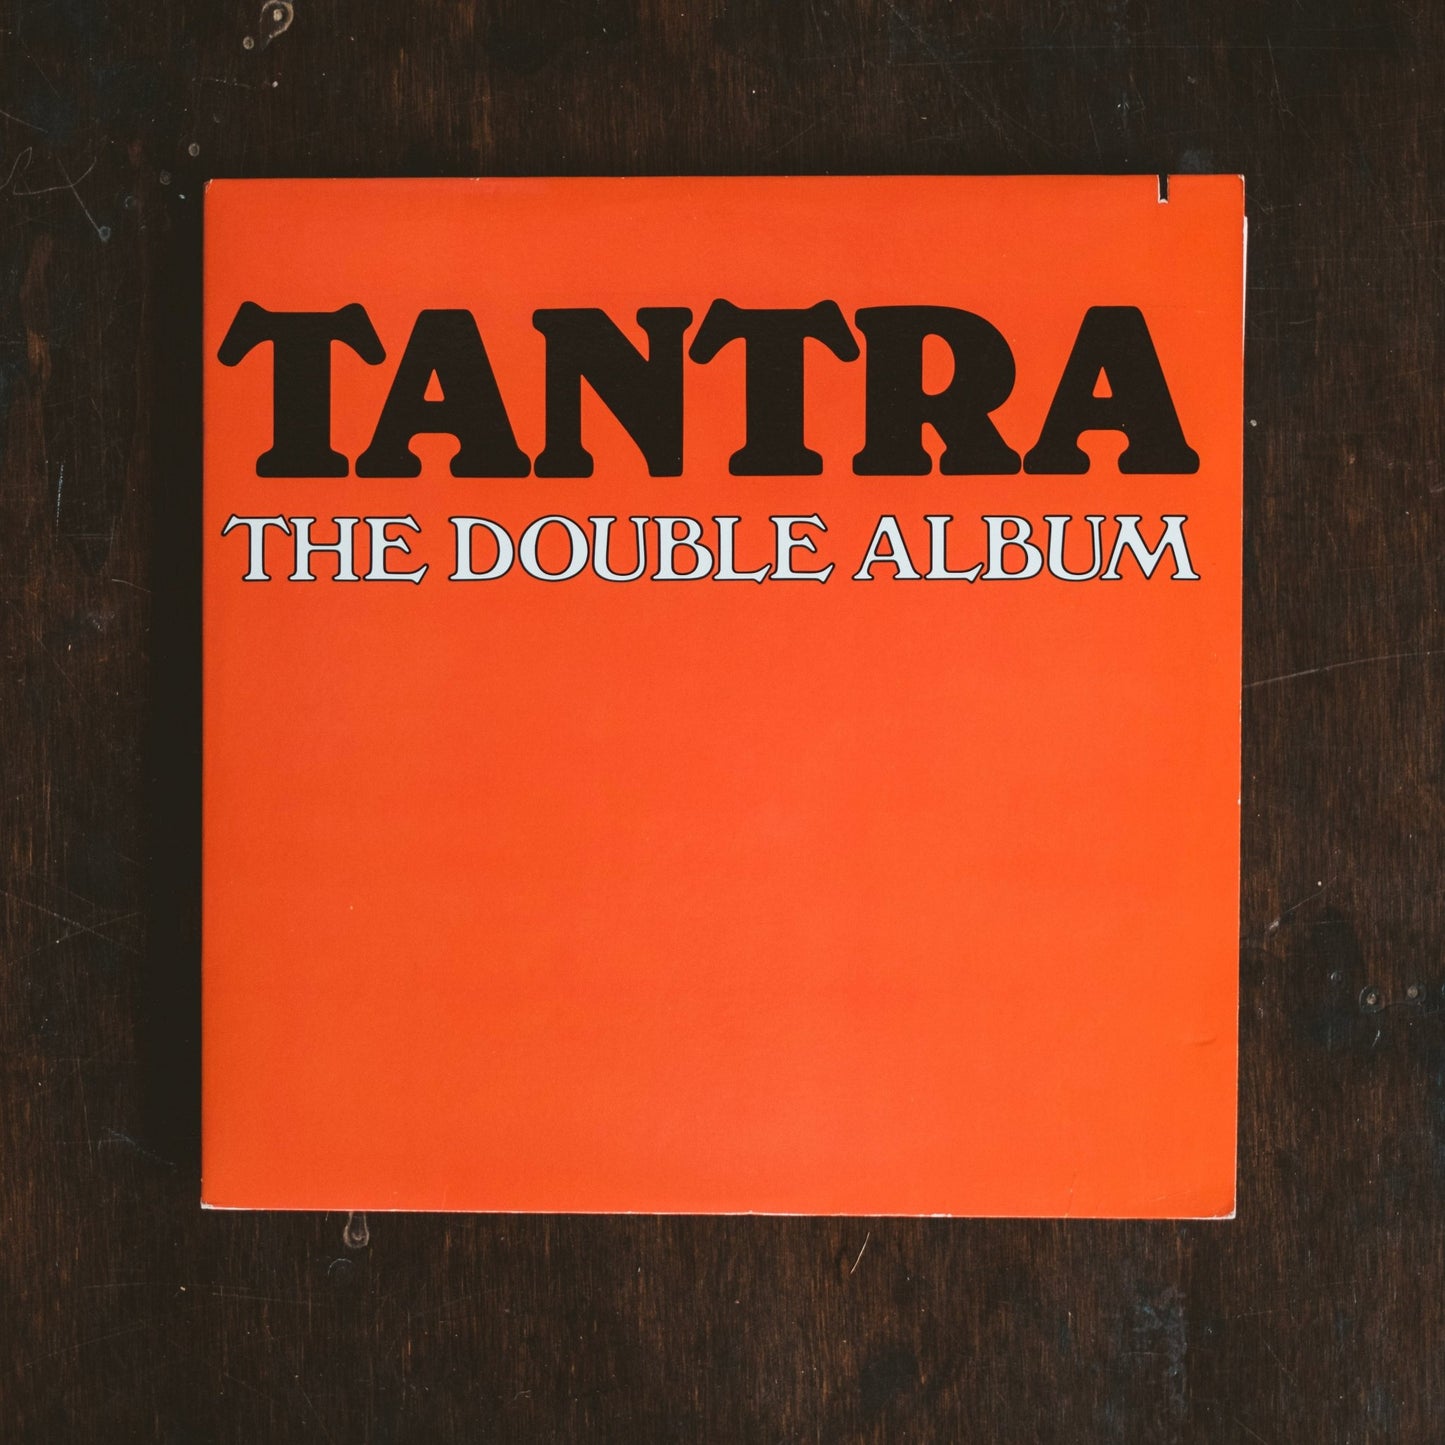 Tantra - The Double Album (Pre-Loved) - VG+-Tantra - The Double Album - LP's - Yellow Racket Records